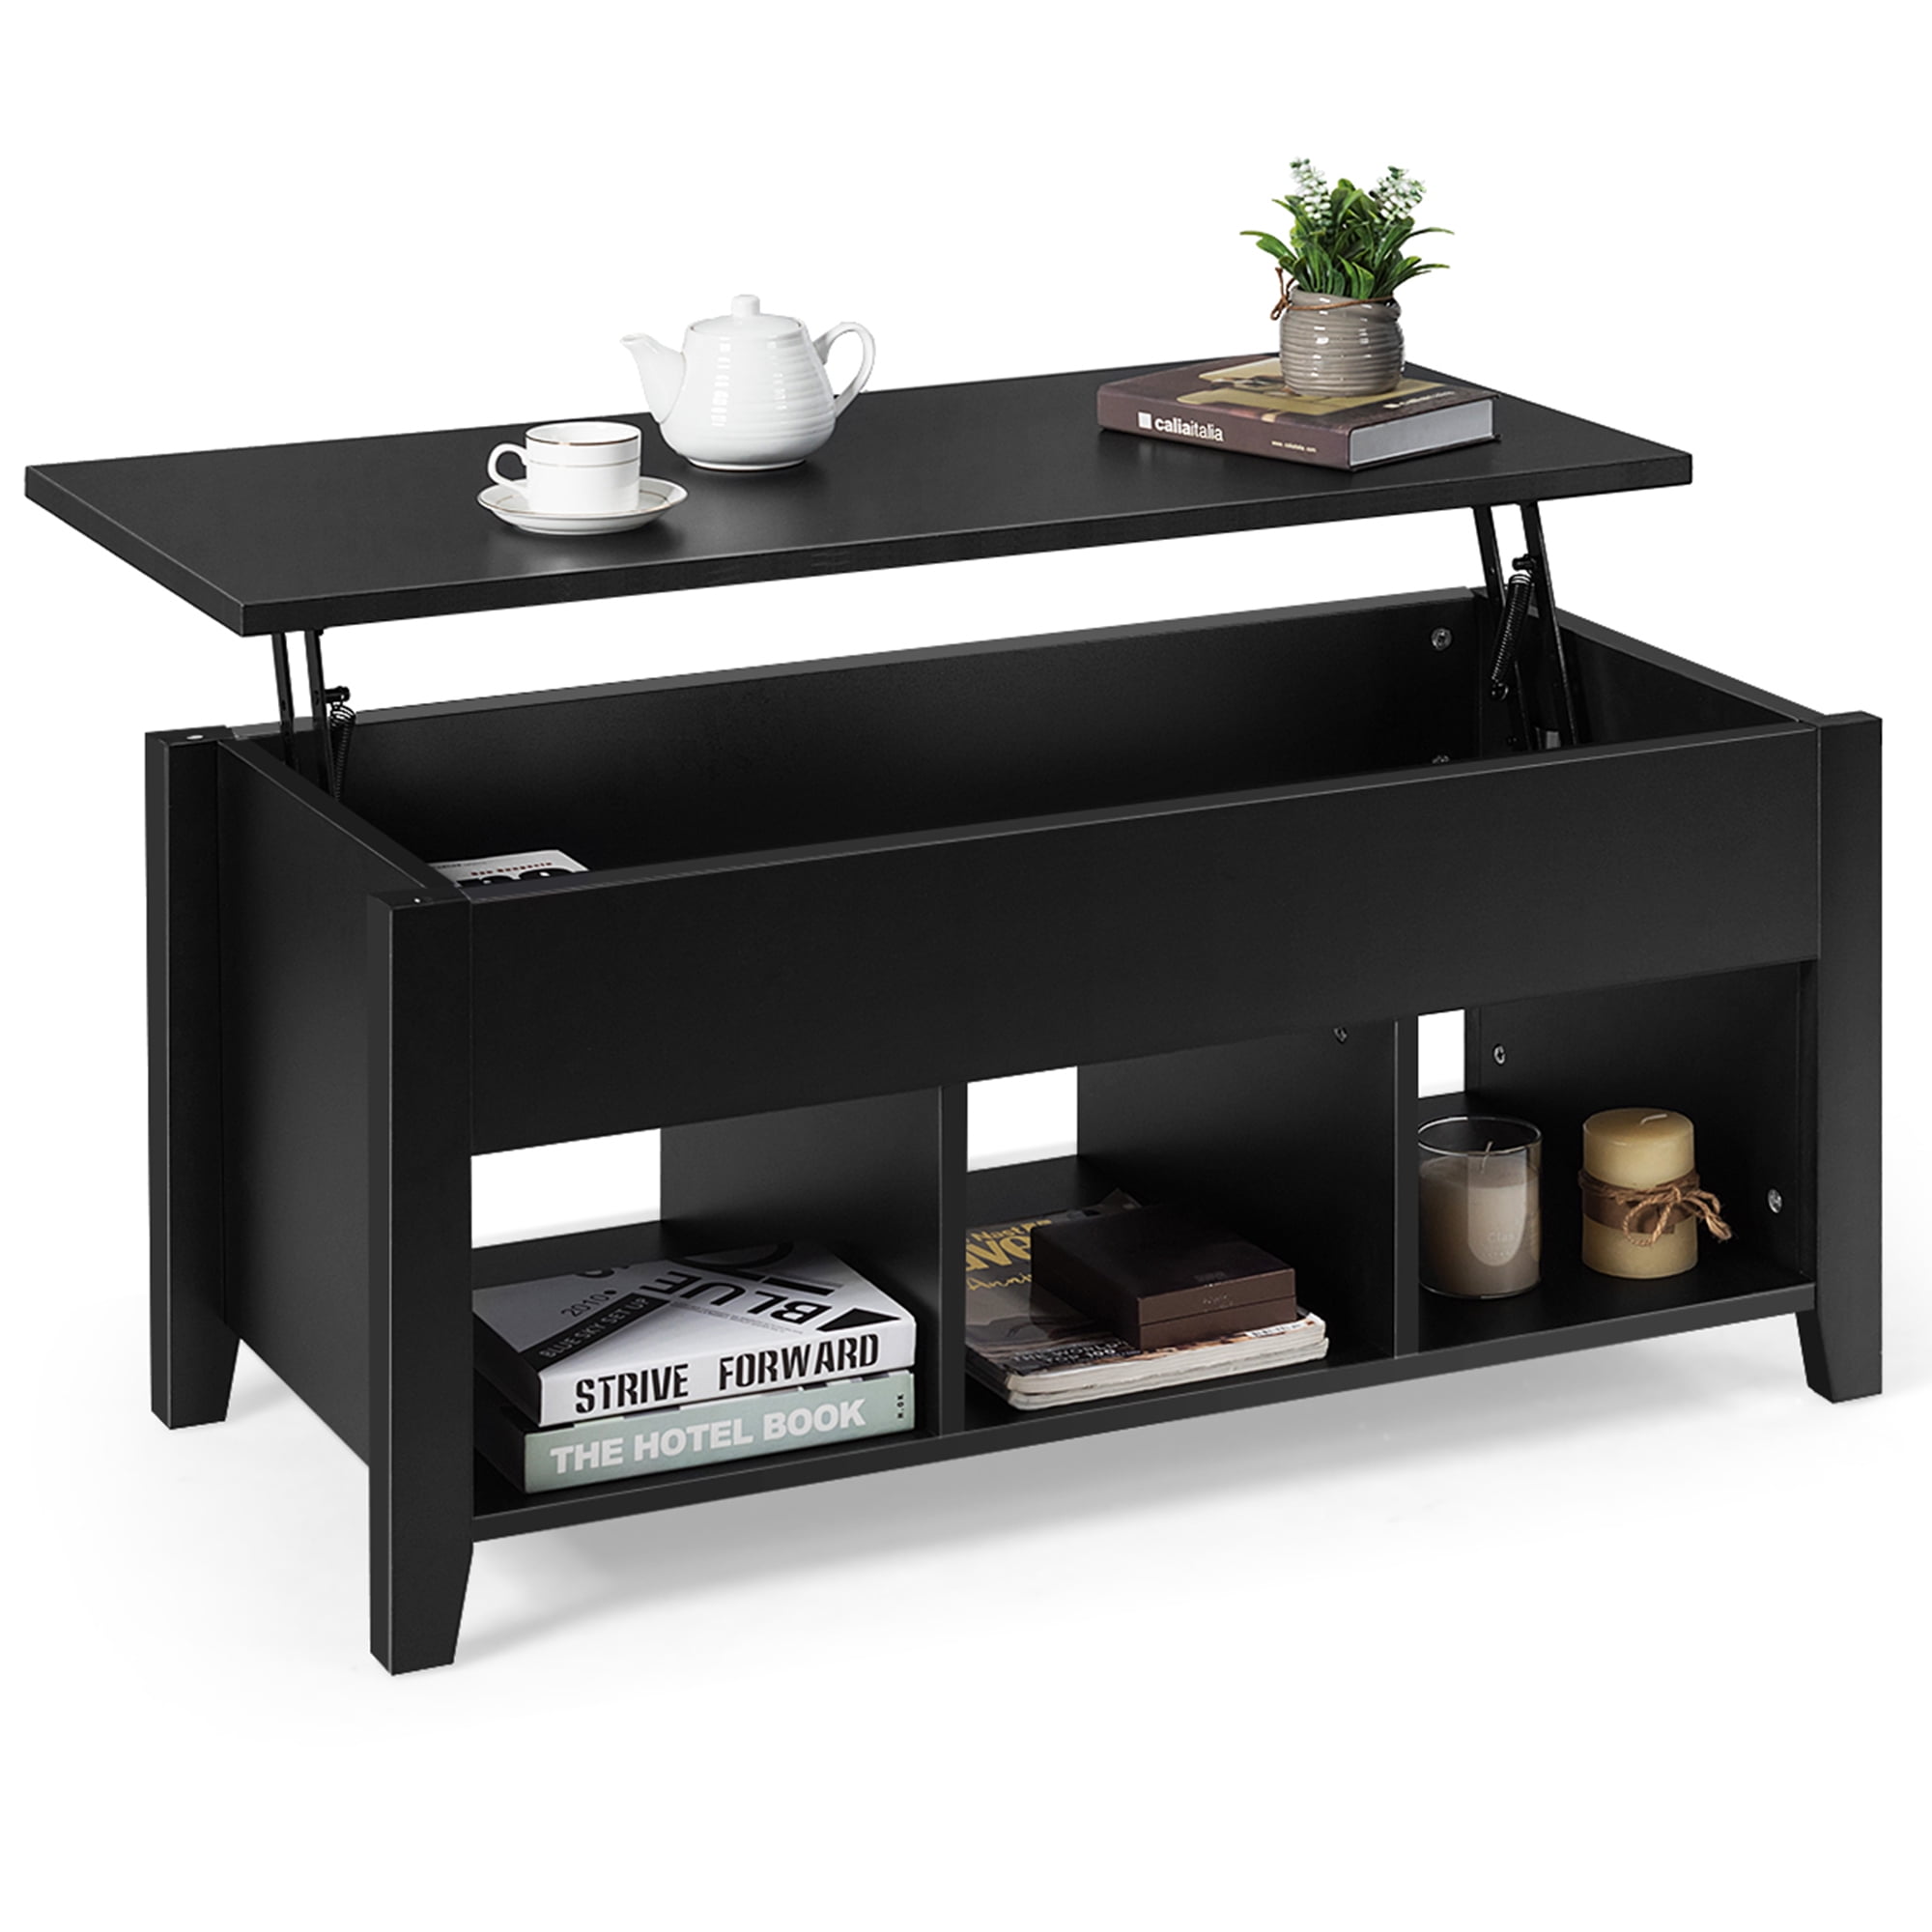 Gymax Lift Top Coffee Table with Storage Compartment Shelf Living Room